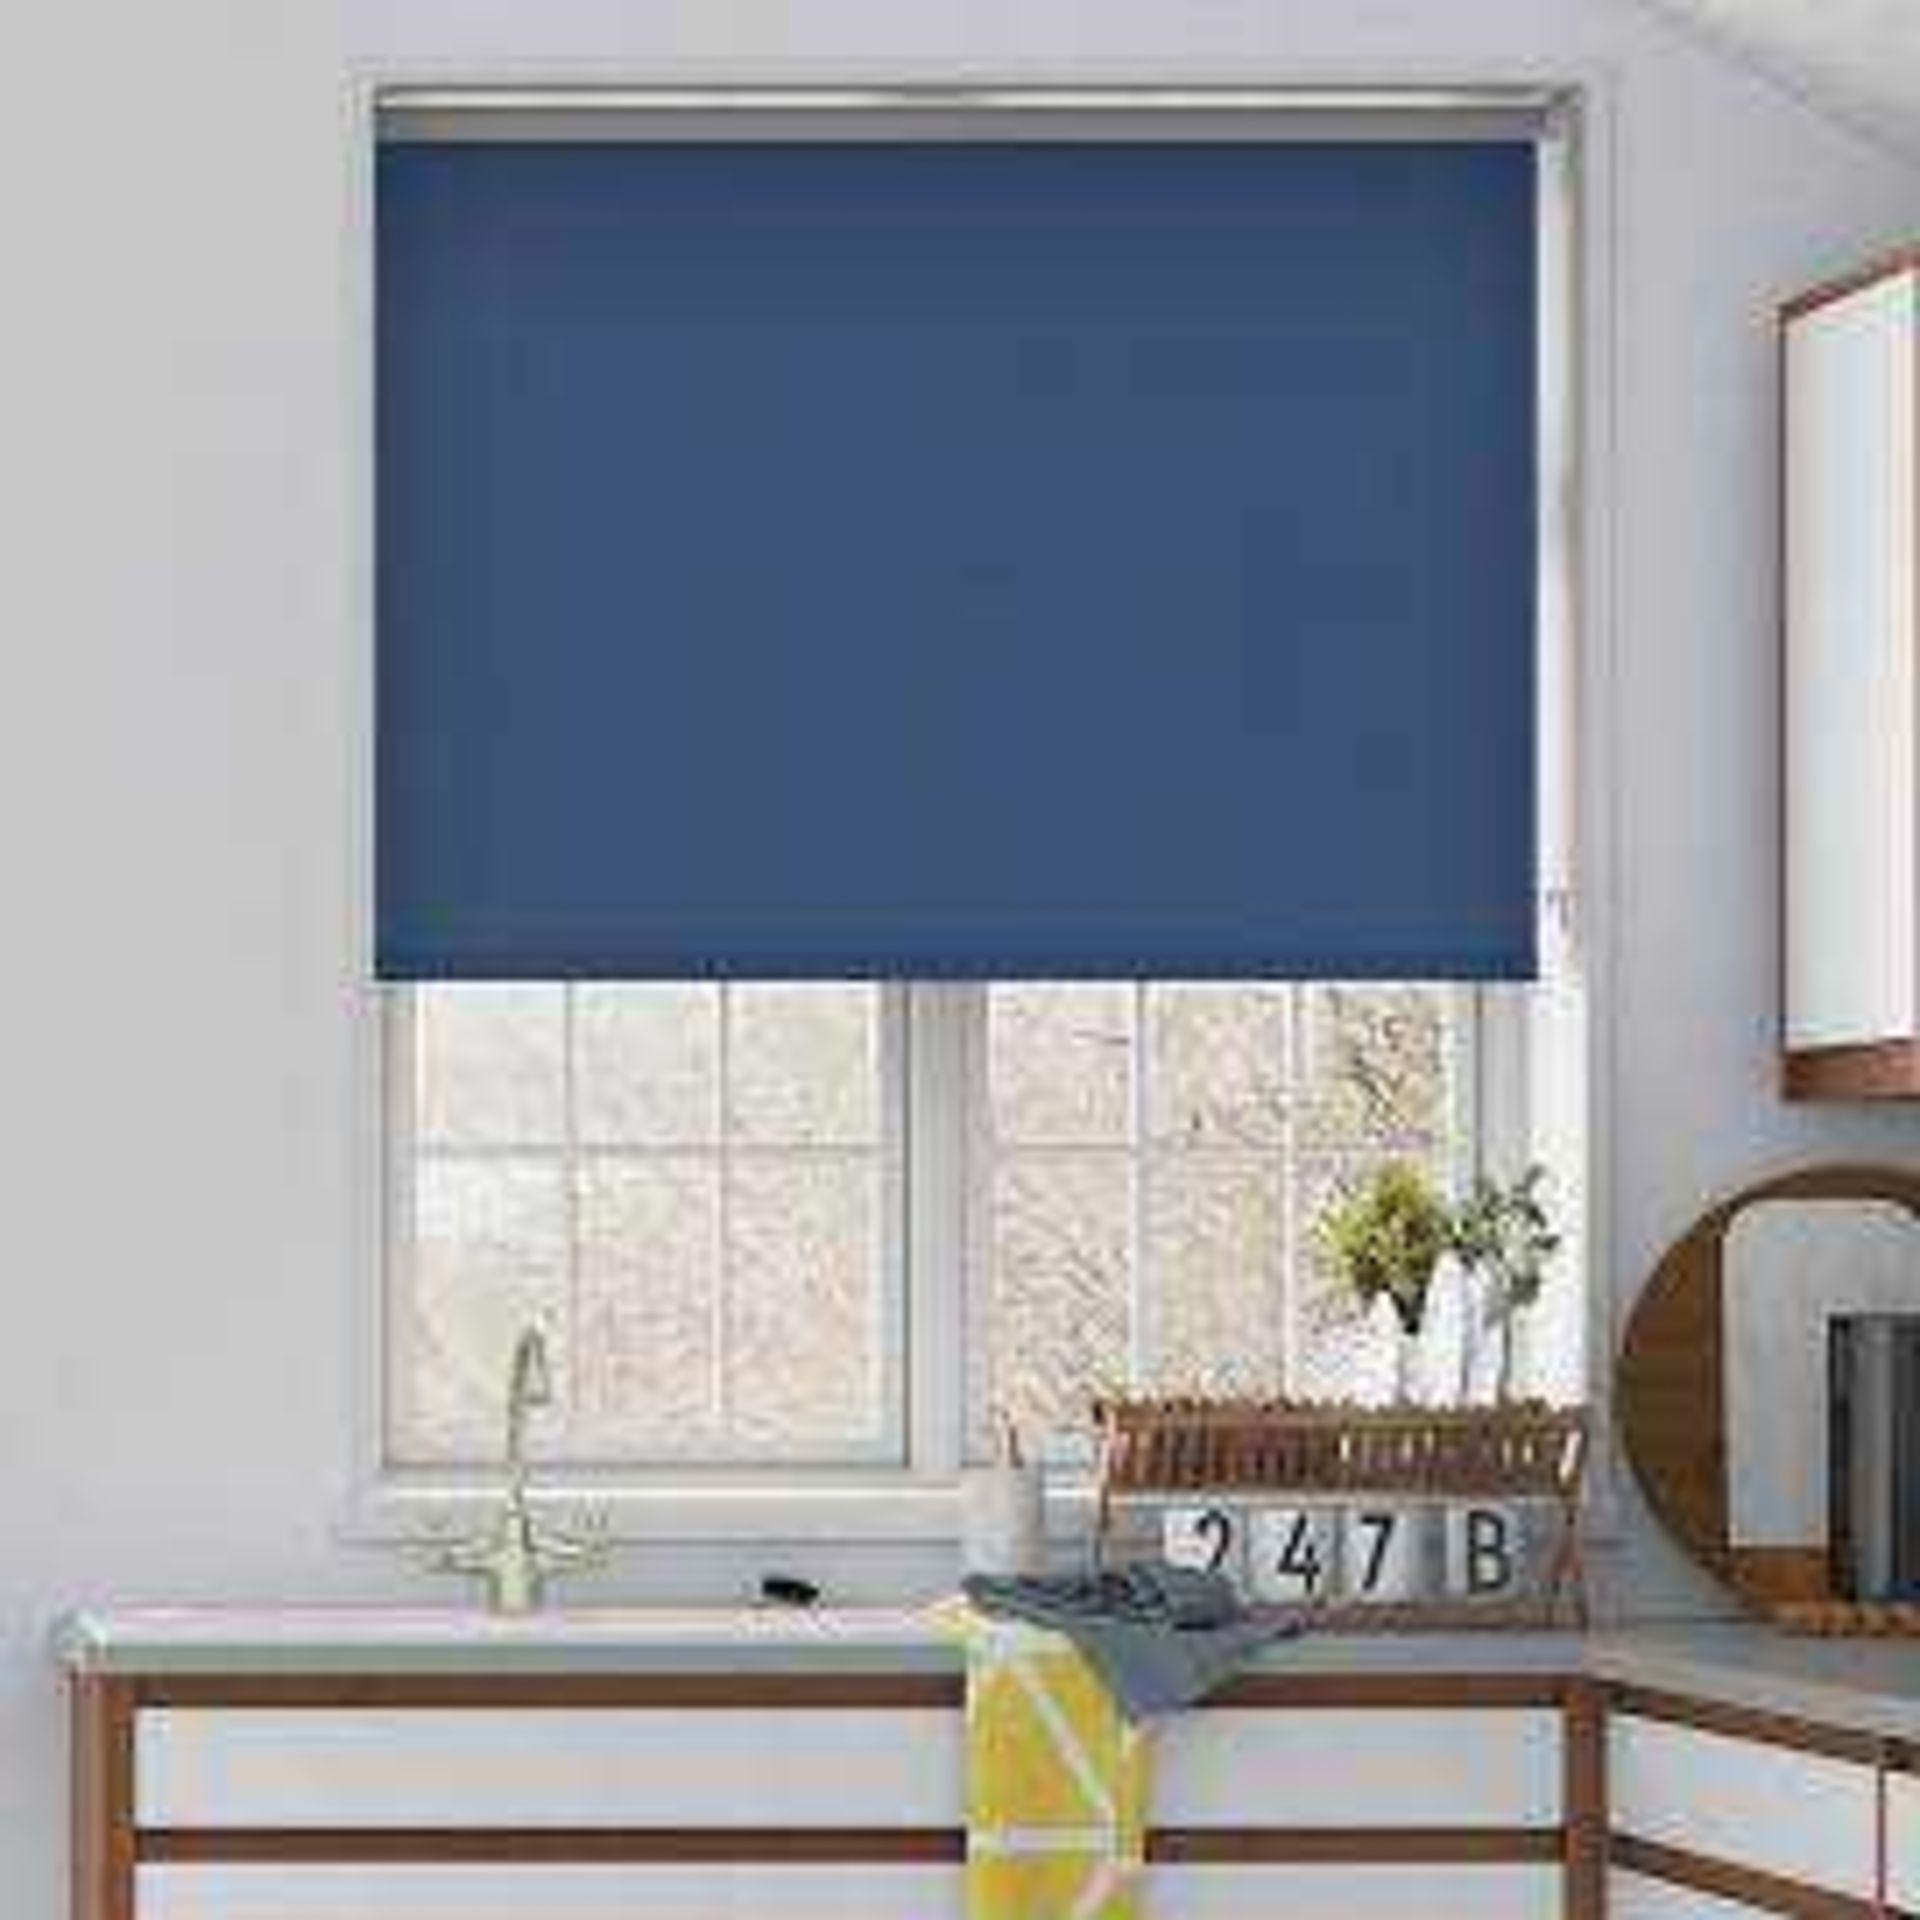 Pallet 2 Combined RRP £3420 Pallet To Contain 380 Round Uni Roller Blind Blue 122X160Cm This Is - Image 2 of 2